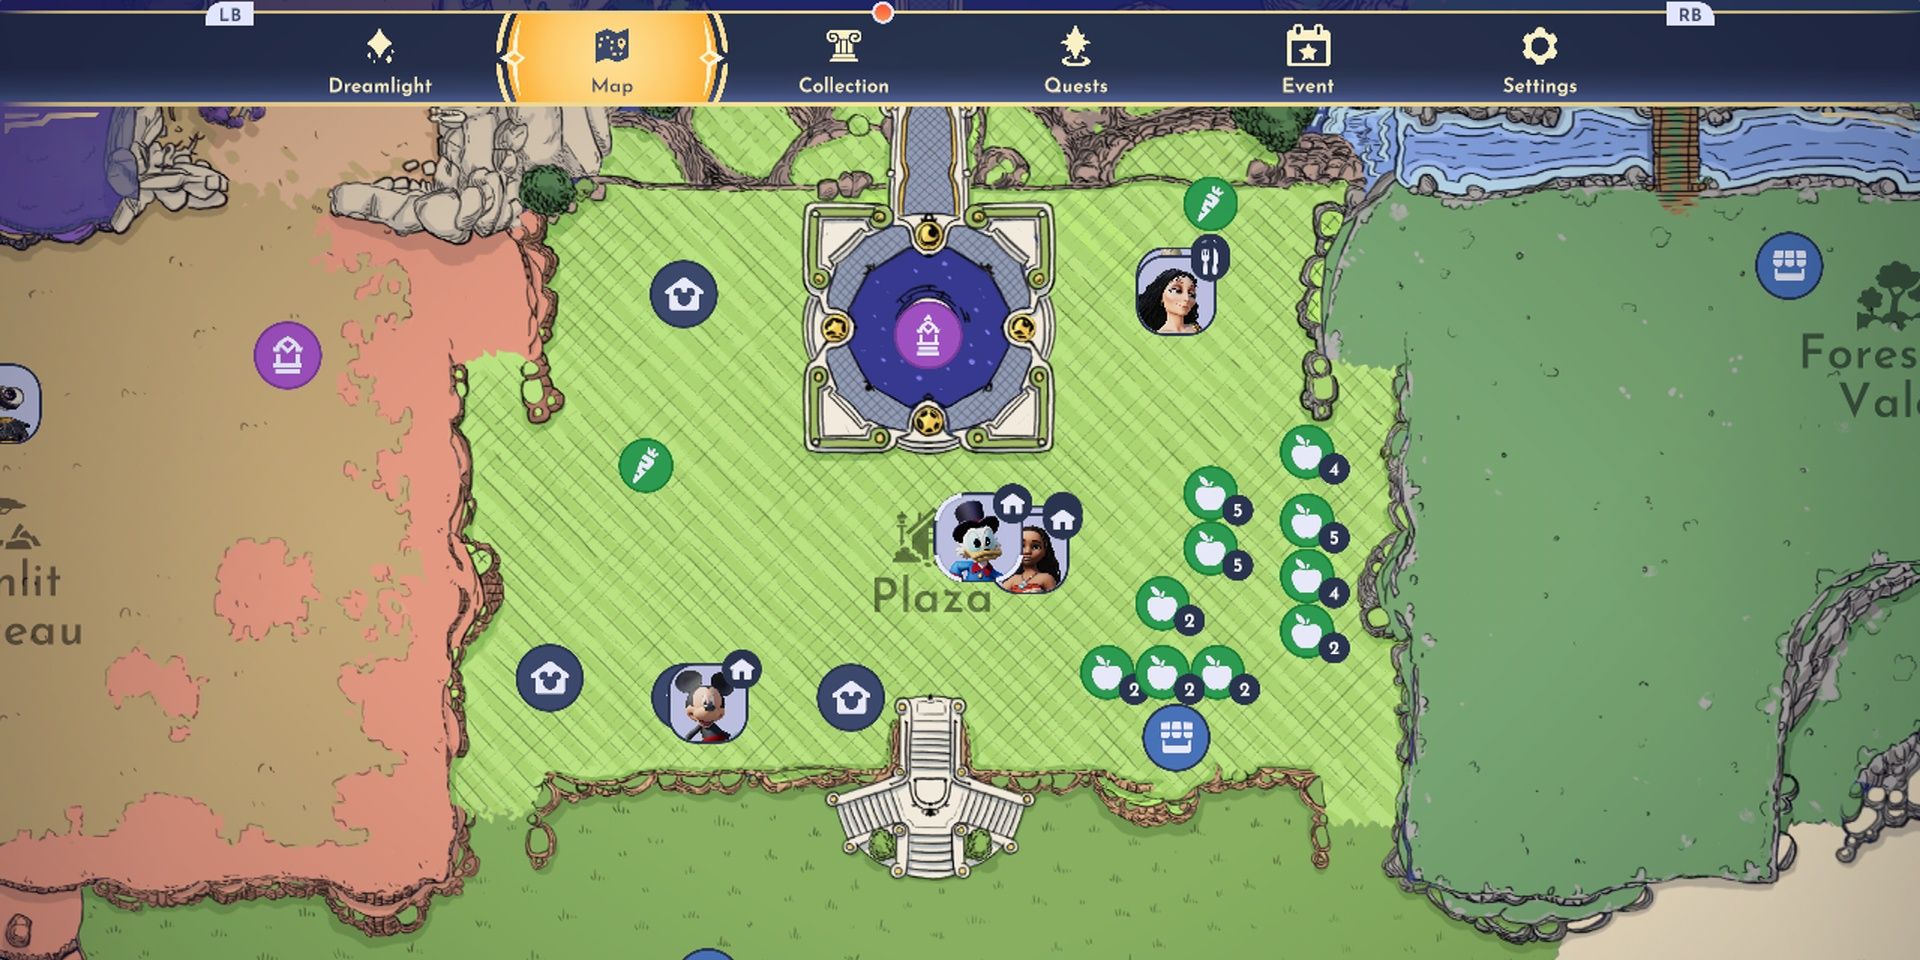 The map is vitally important in Disney Dreamlight Valley